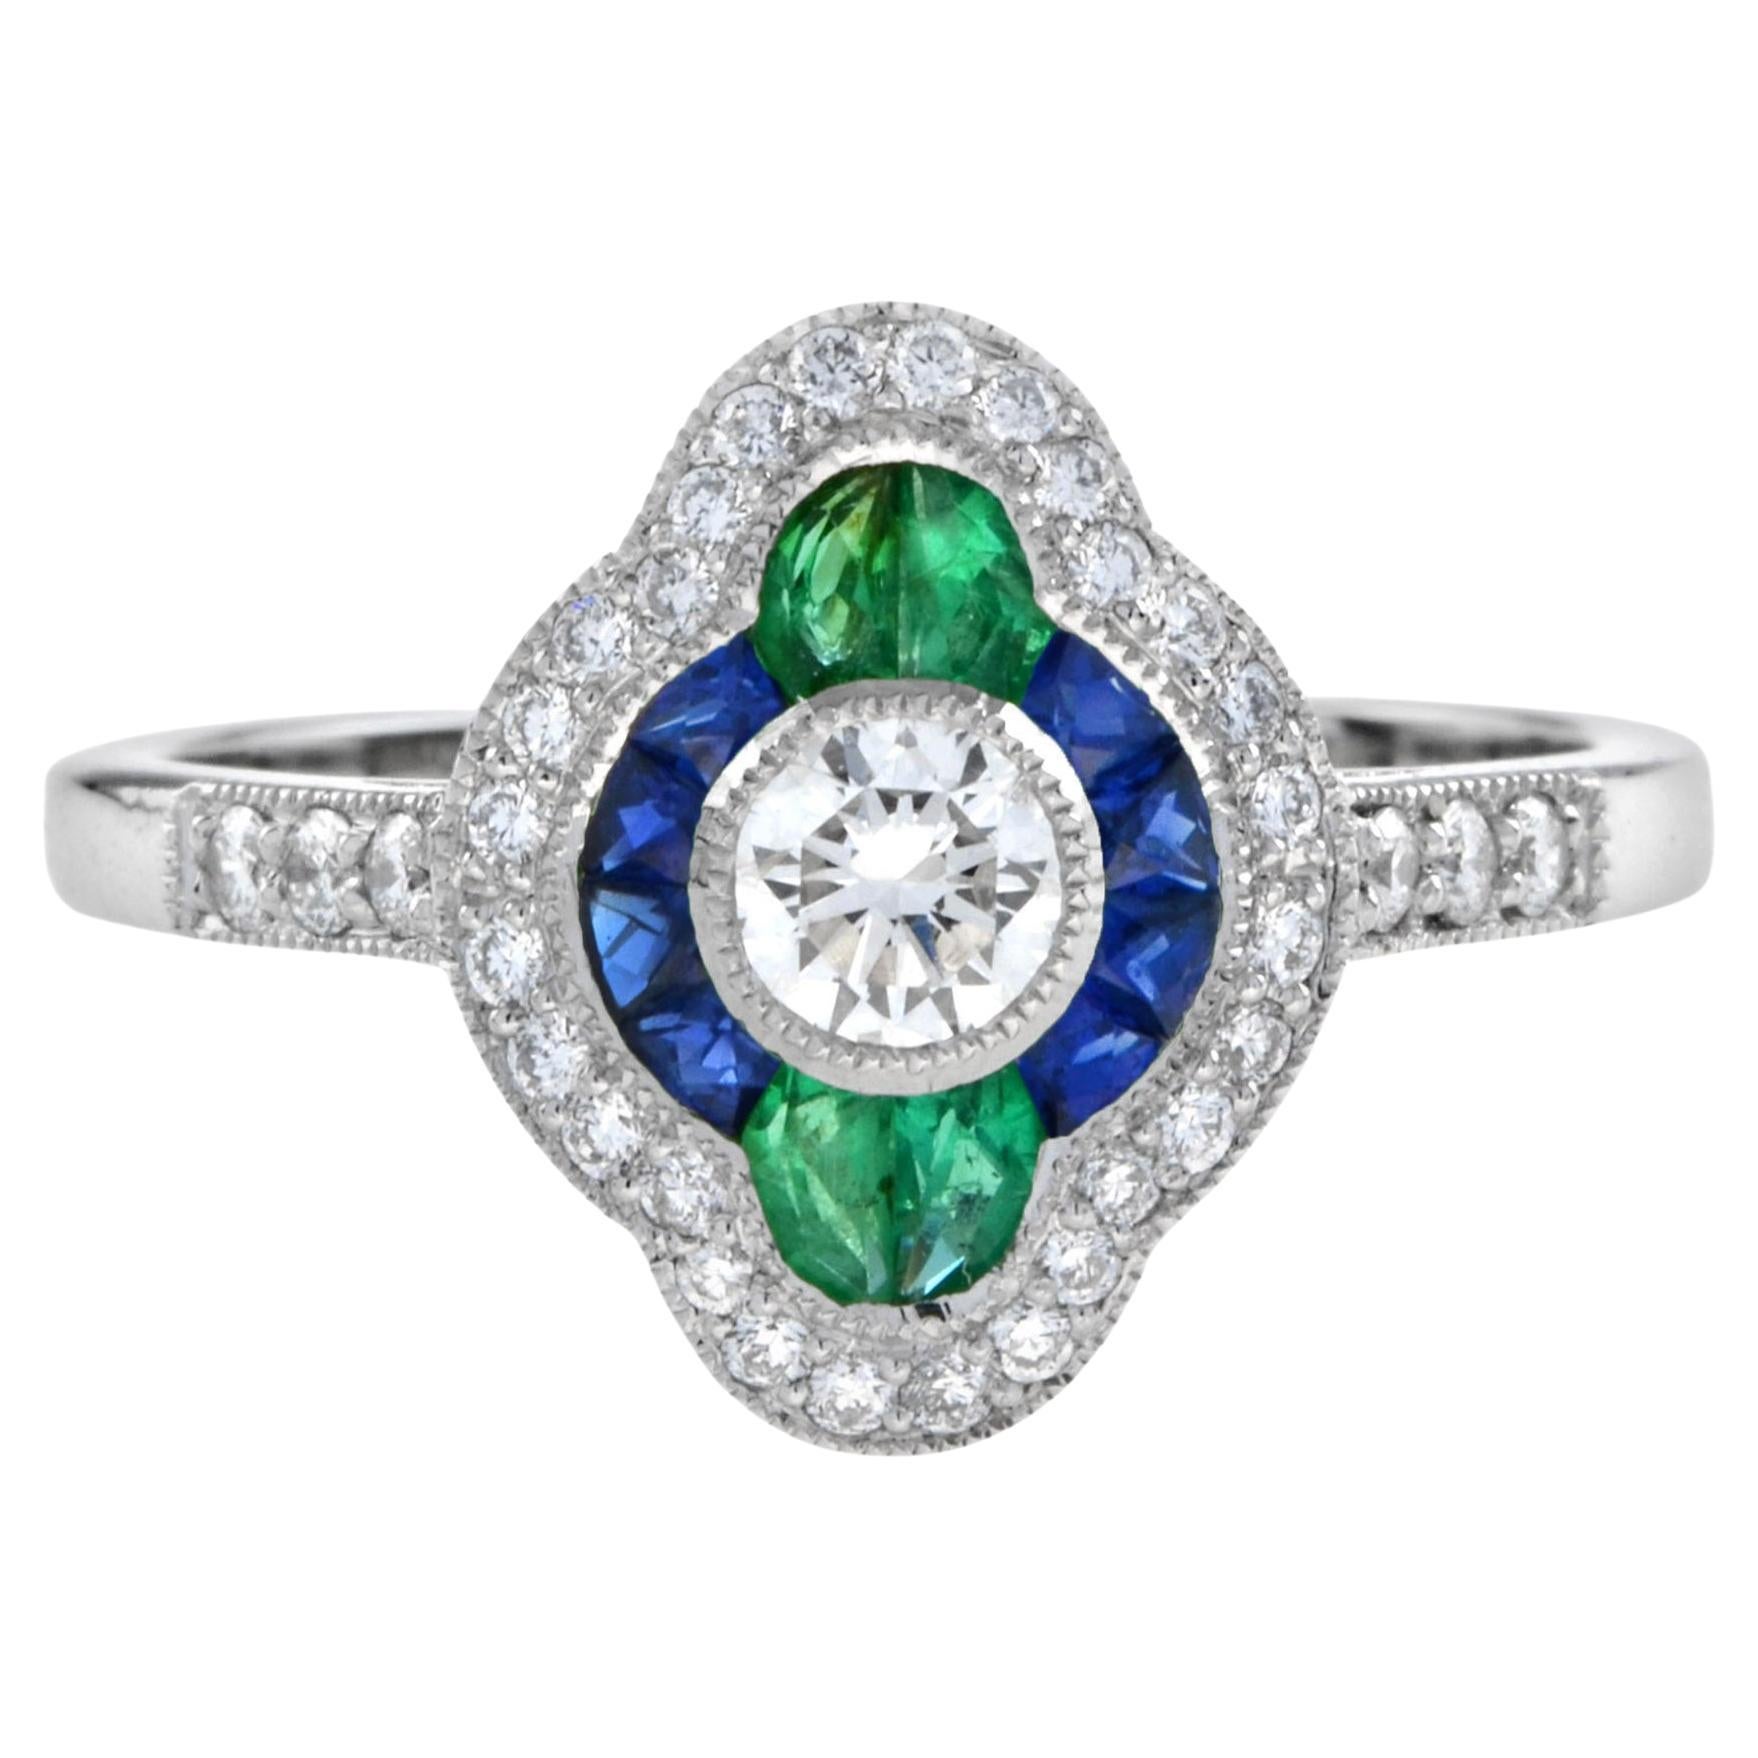 Diamond Sapphire Emerald Art Deco Style Engagement Ring in 18k White Gold